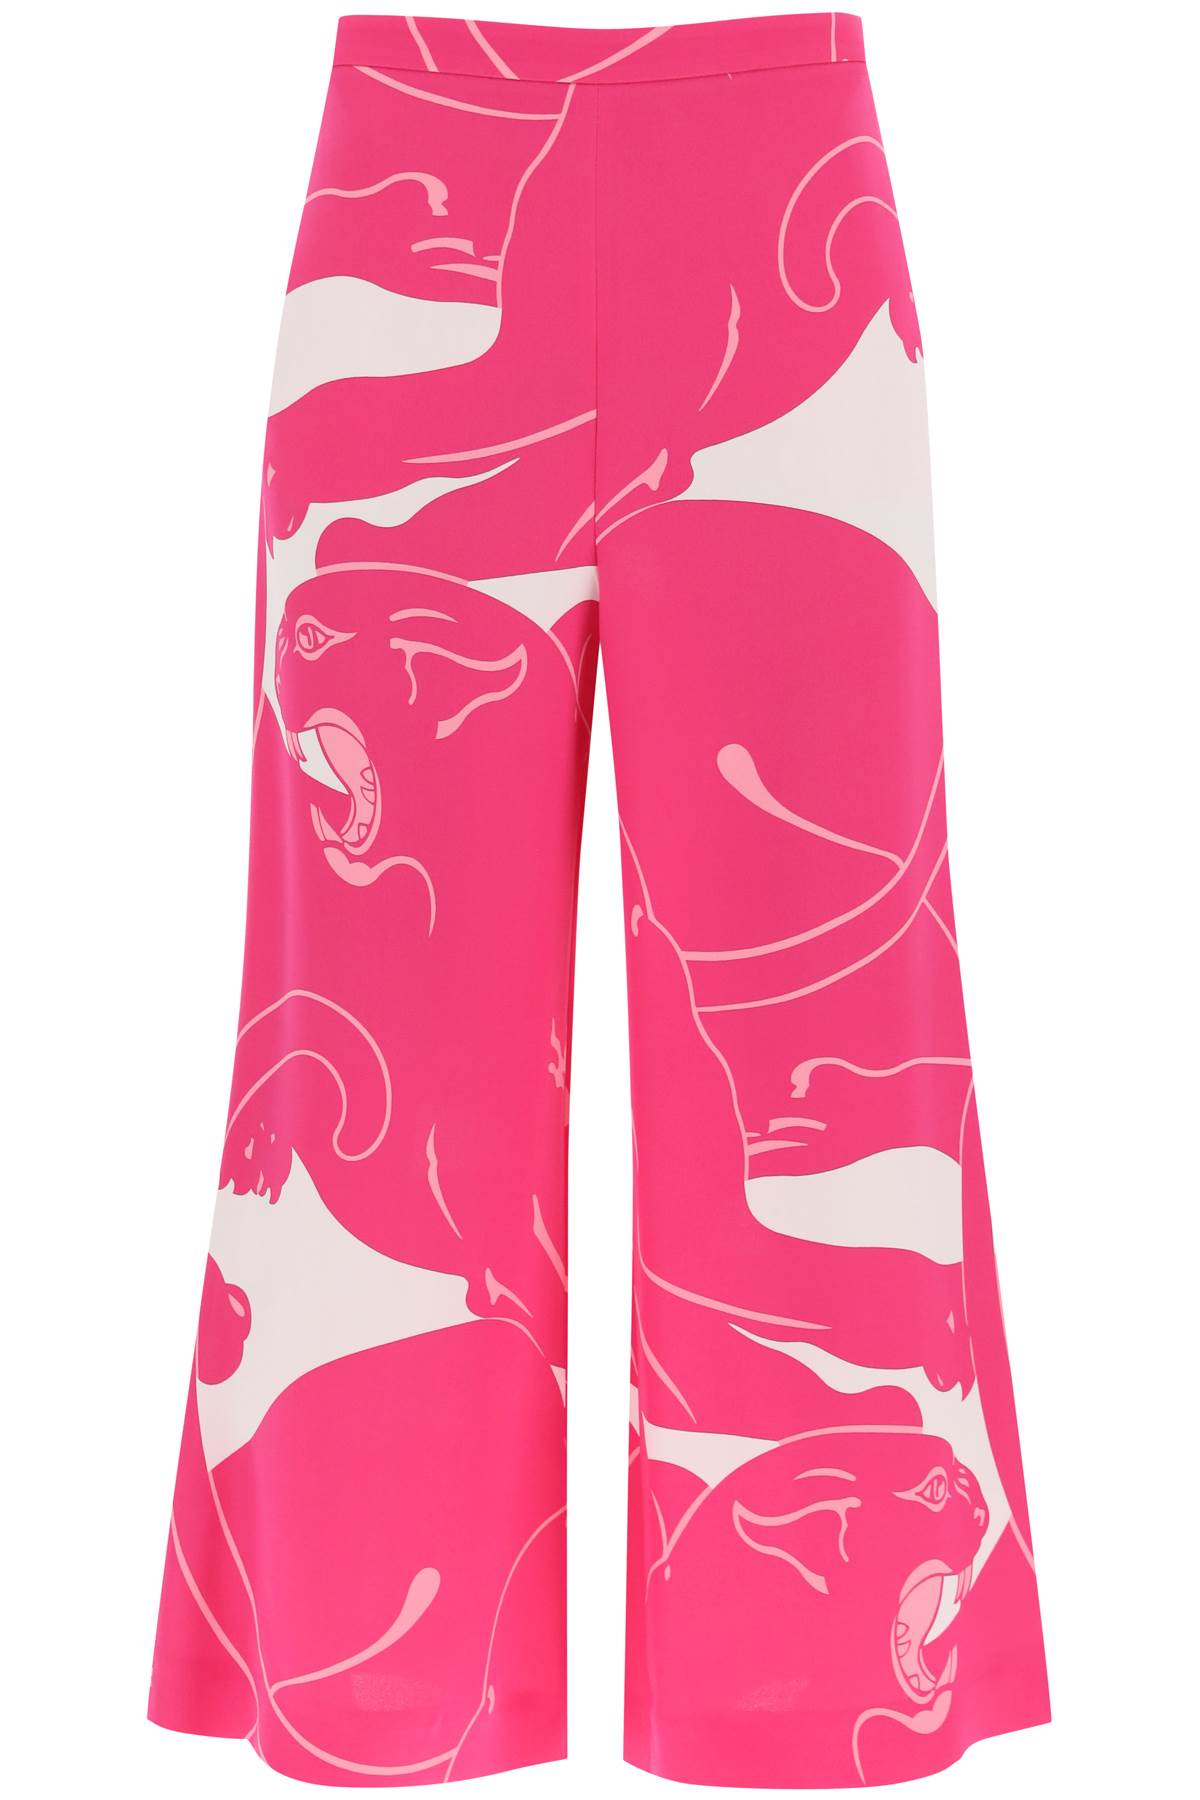 VALENTINO Panther Print Cady Cropped Pants for Women